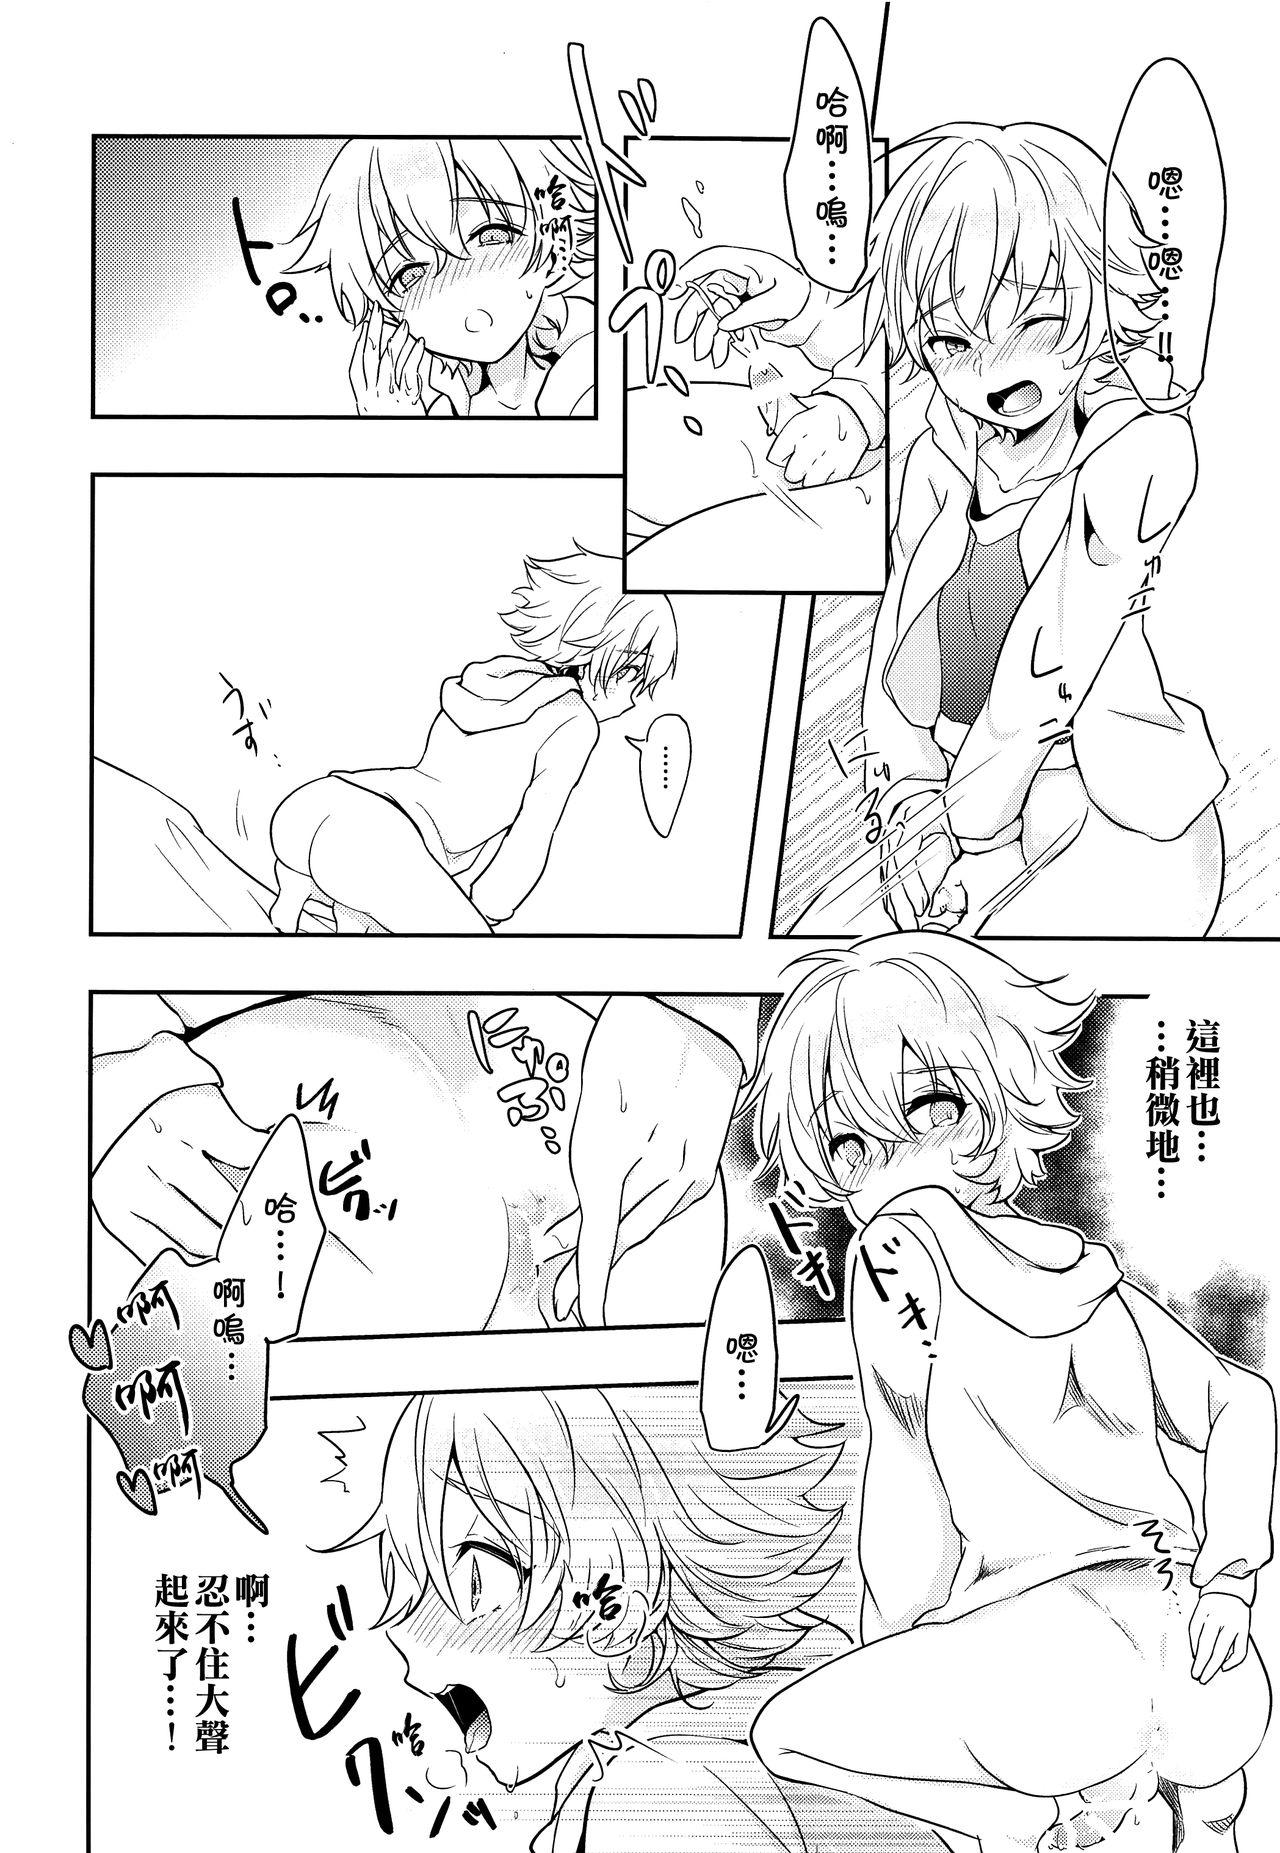 Babes Ko-Gil Challenge - Fate grand order Body Massage - Page 11